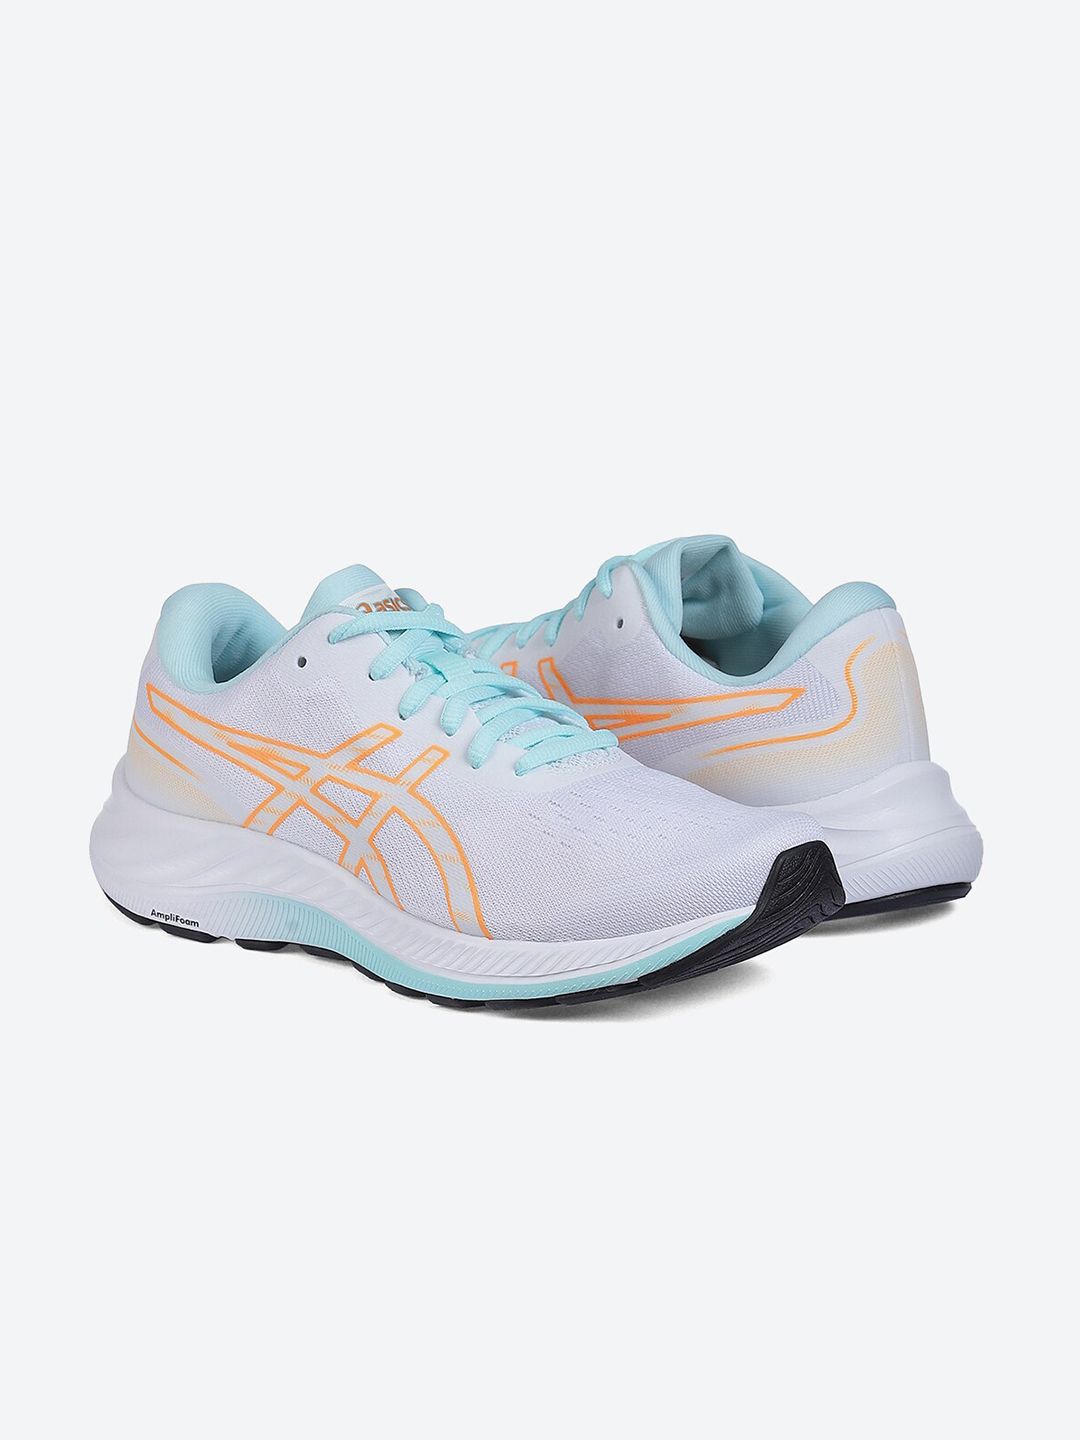 ASICS Women White Running Non-Marking Gel-Excite 9 Shoes Price in India